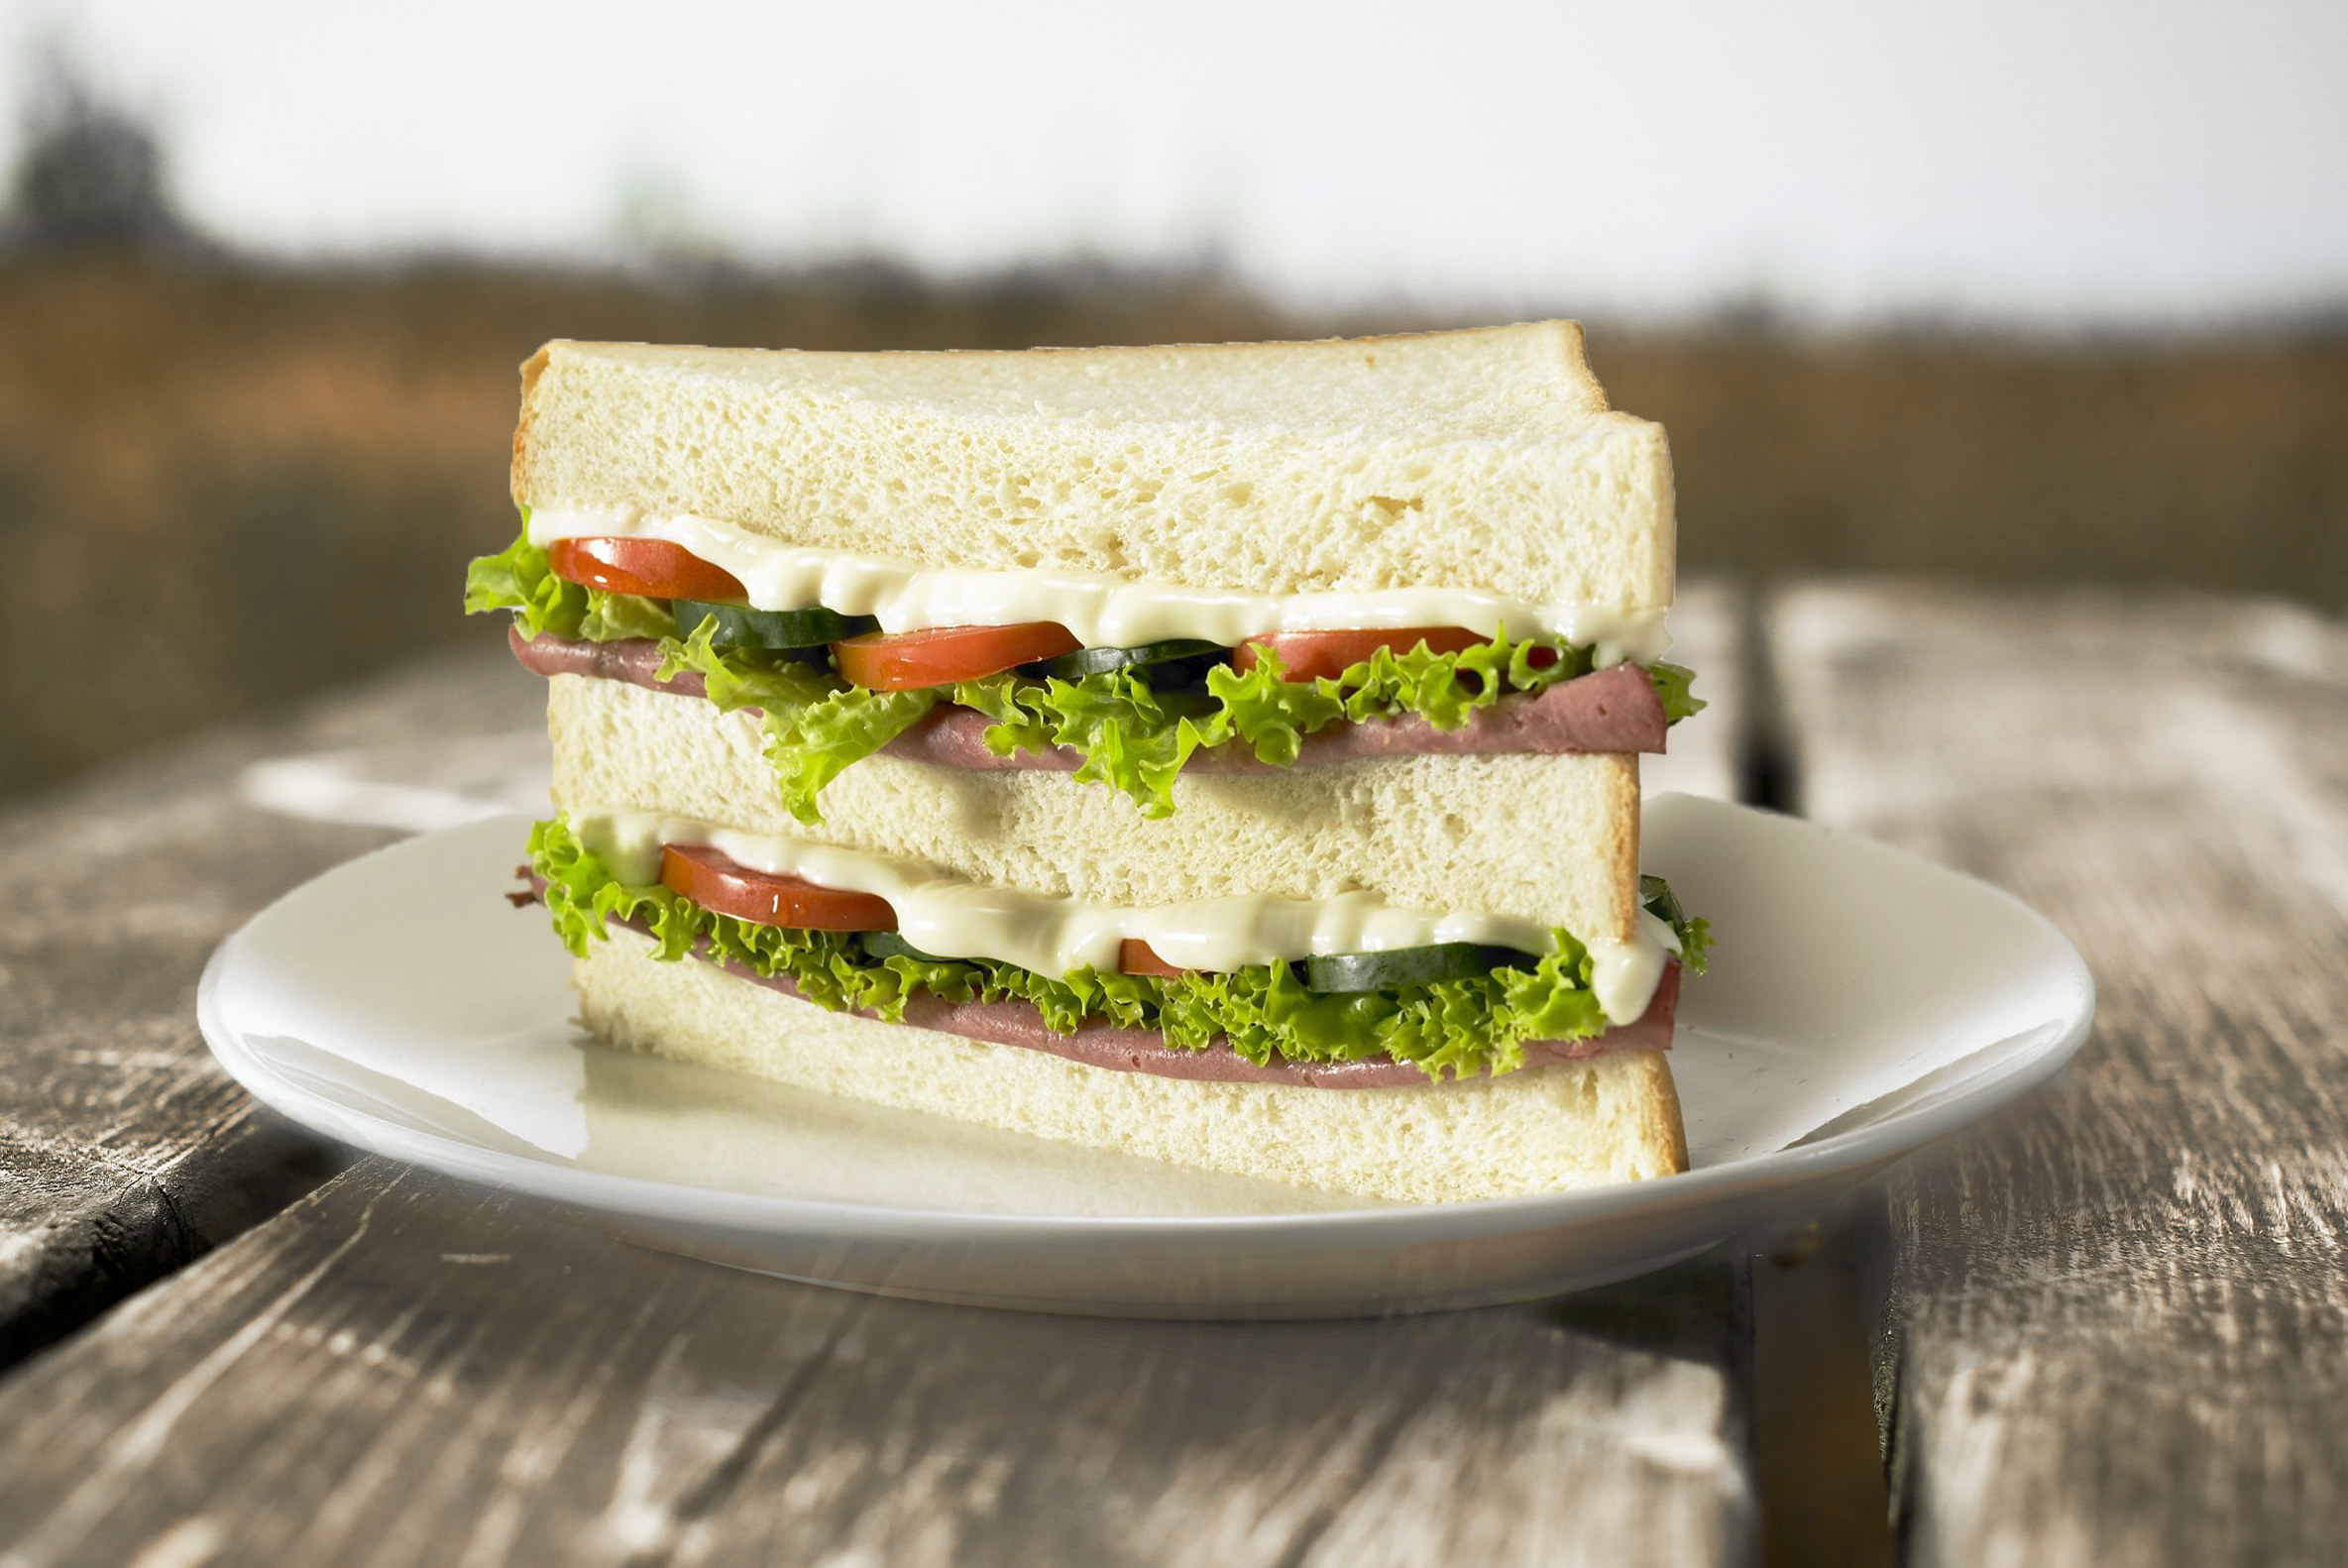 A small plate with a sandwich that has meat, lettuce, tomato and mayo sits on a wooden table